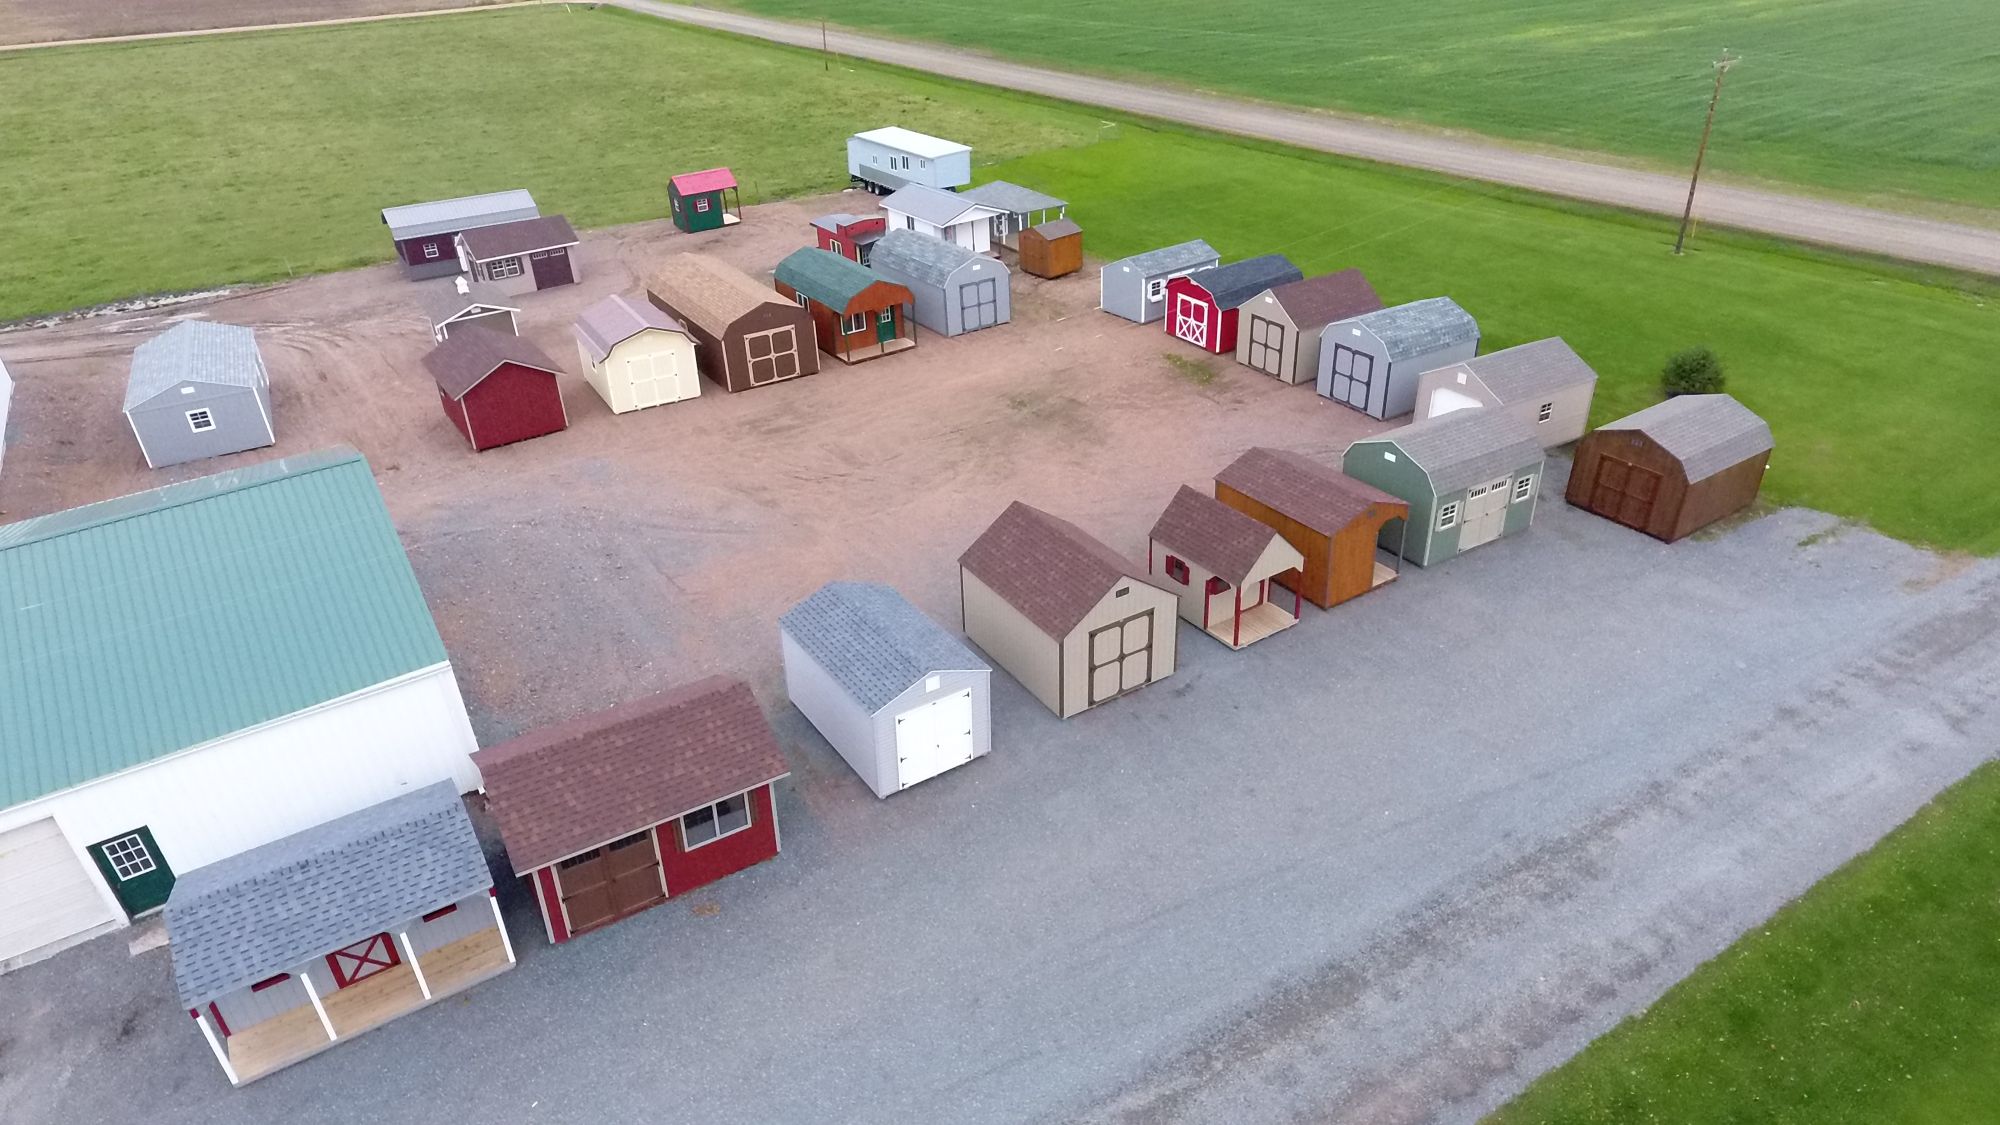 https://www.shedsdelivered.com/wp-content/uploads/2019/07/portable-shed-manufacturing-facility-lot-in-wisconsin.jpg